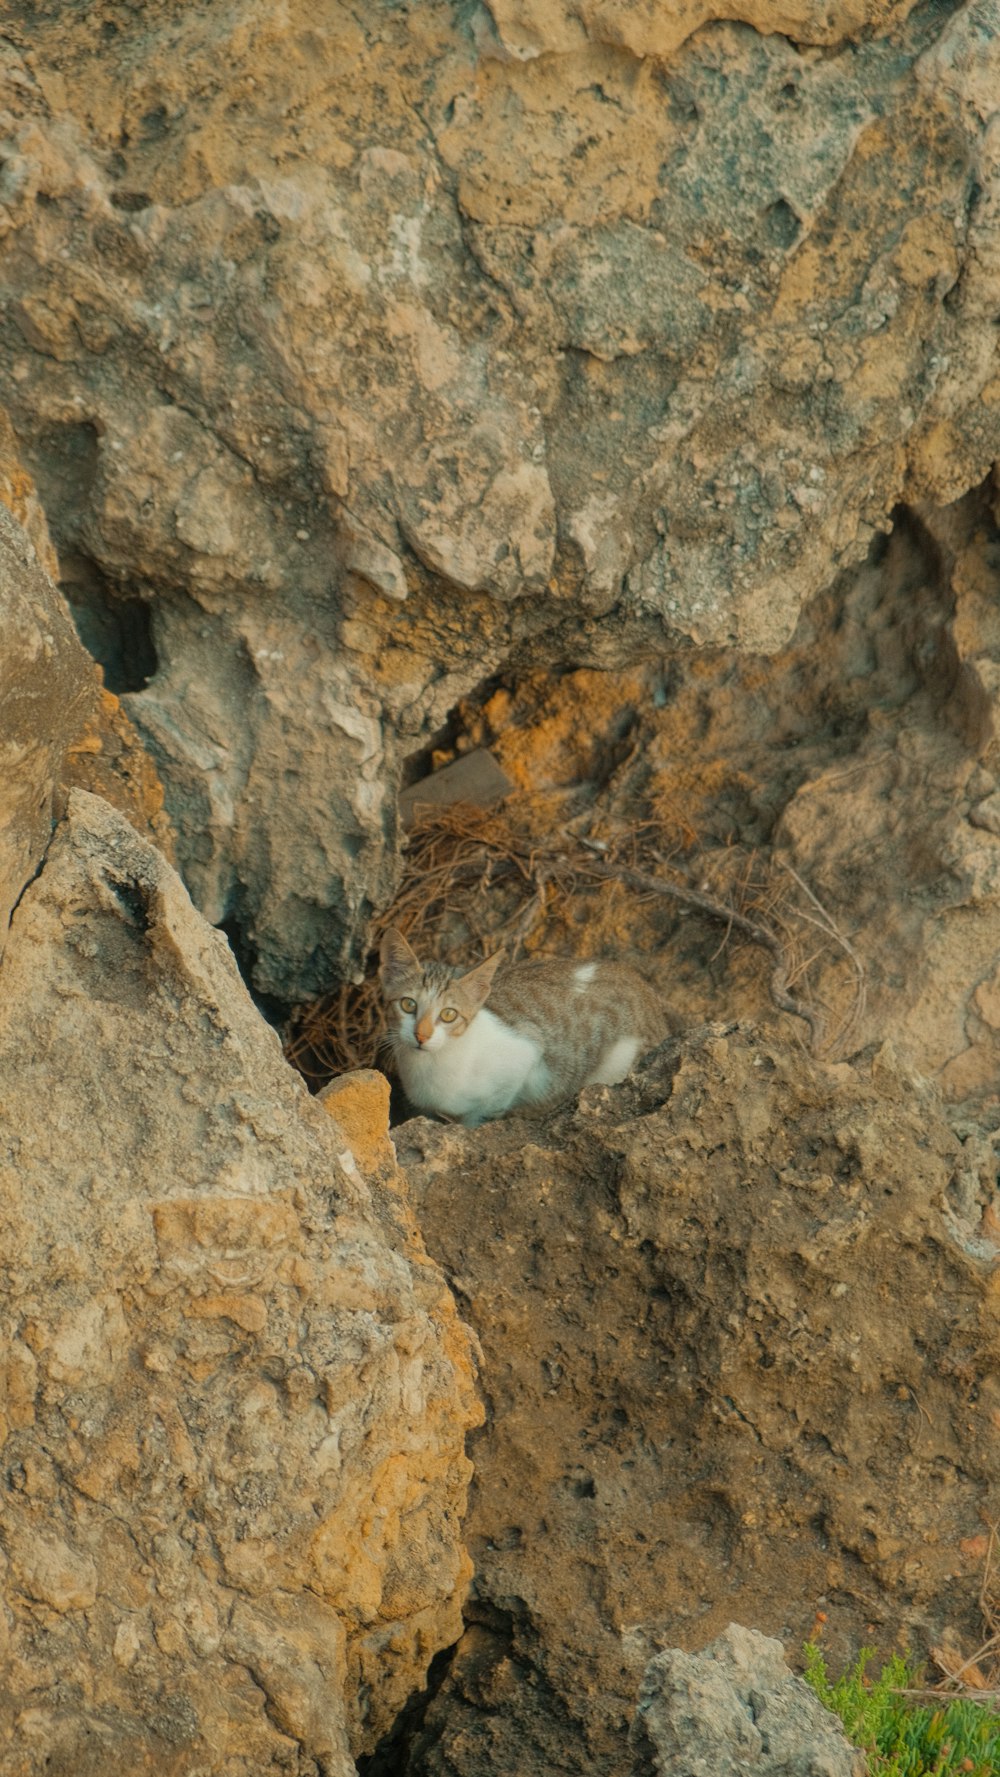 a bird is sitting in a hole in the rocks